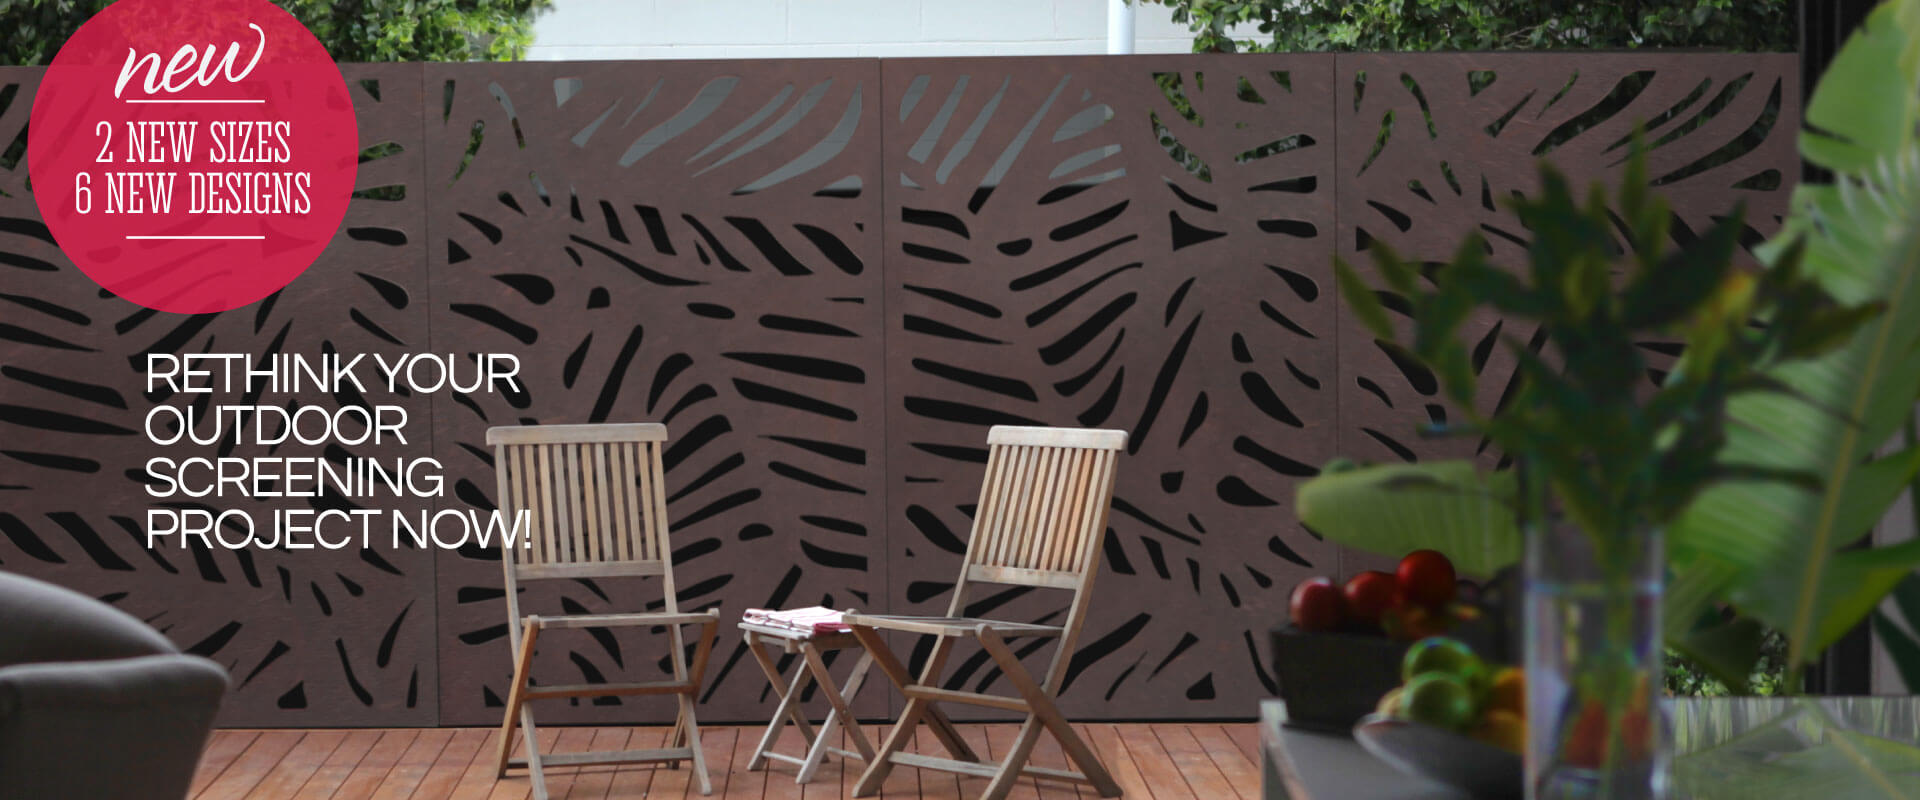 DAINTREE Outdoor Privacy Screens